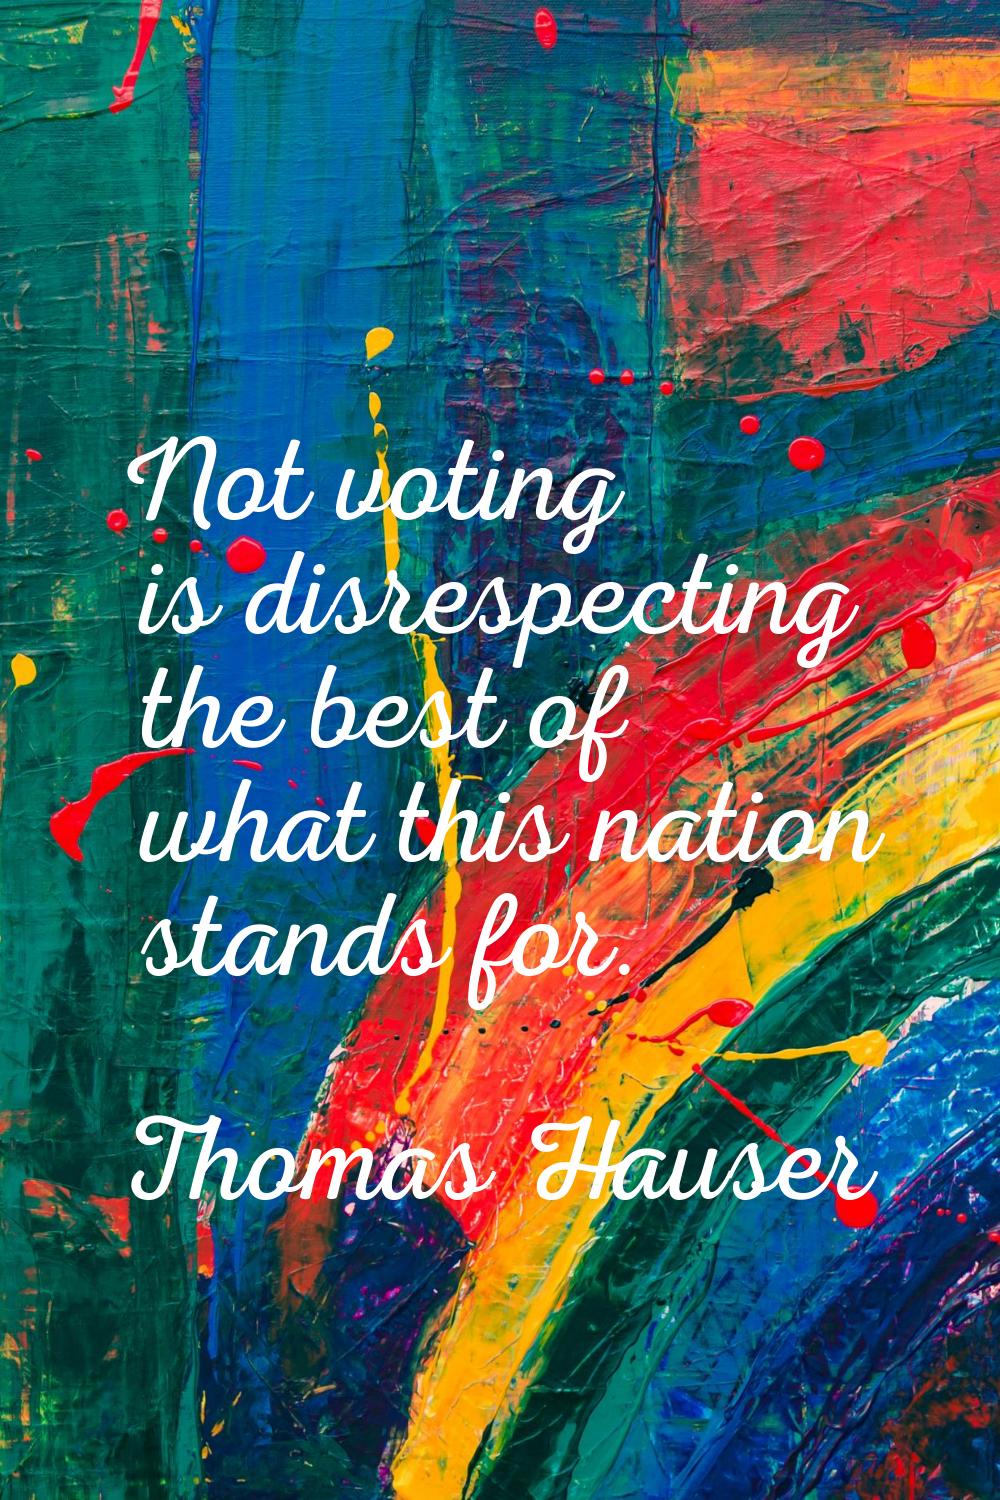 Not voting is disrespecting the best of what this nation stands for.